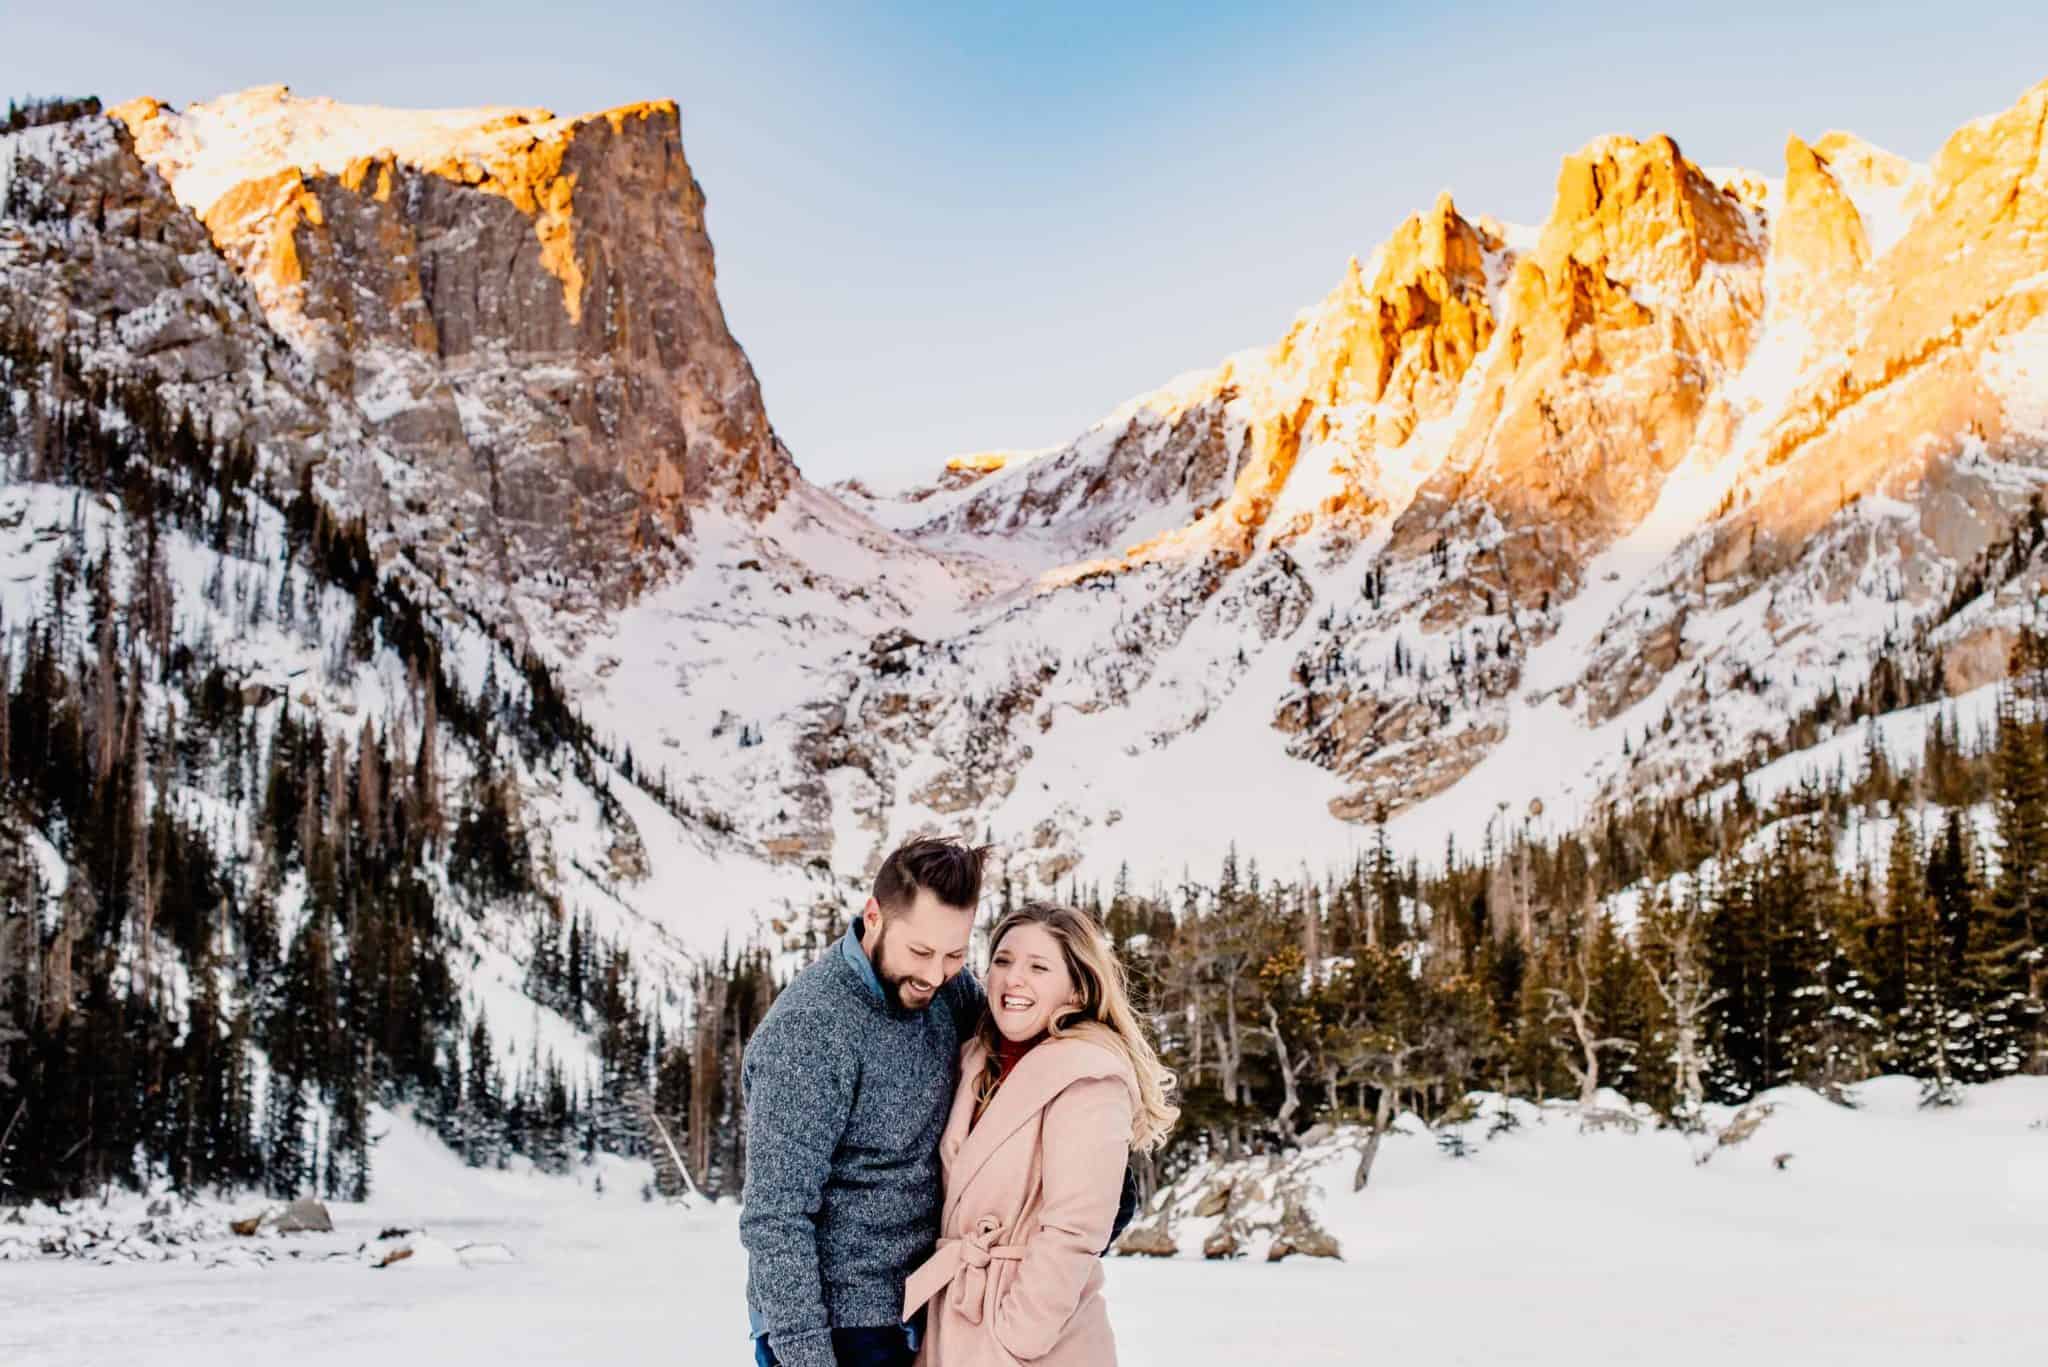 couple at a mountain in winter as the sun rises and illuminates the mountains